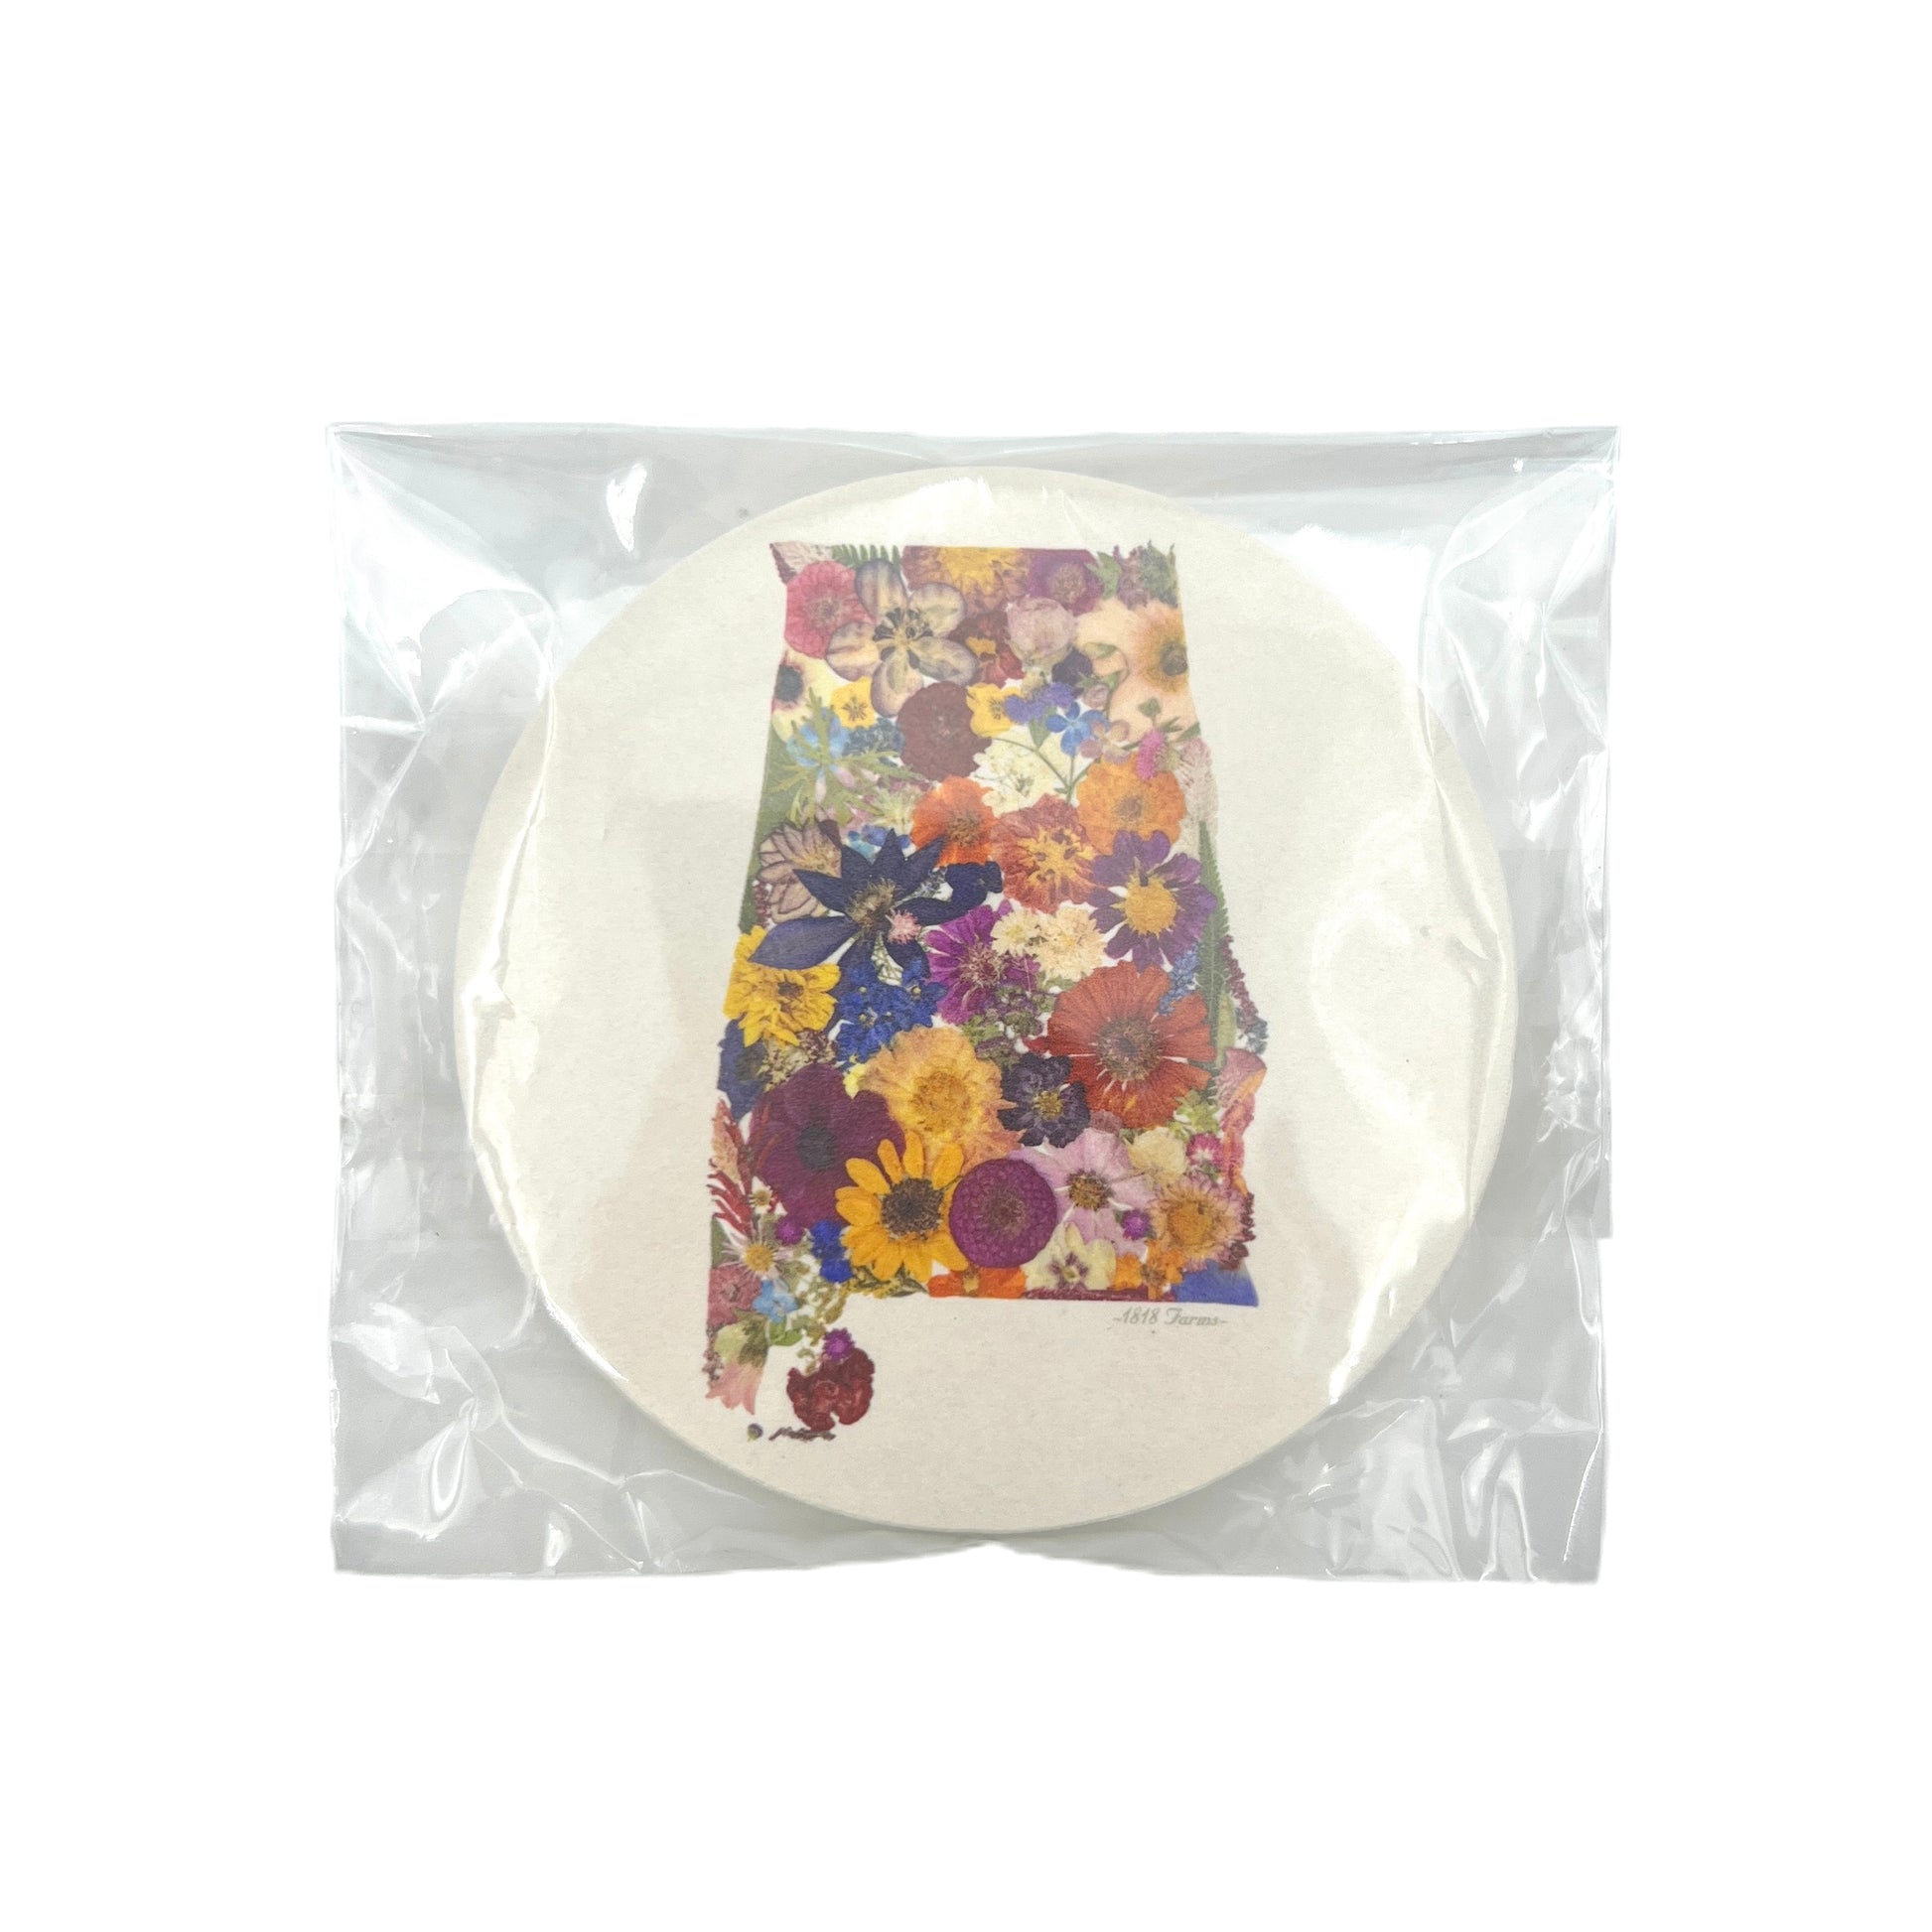 State Themed Drink Coasters (Set of 6)  - "Where I Bloom" Collection Coaster 1818 Farms   